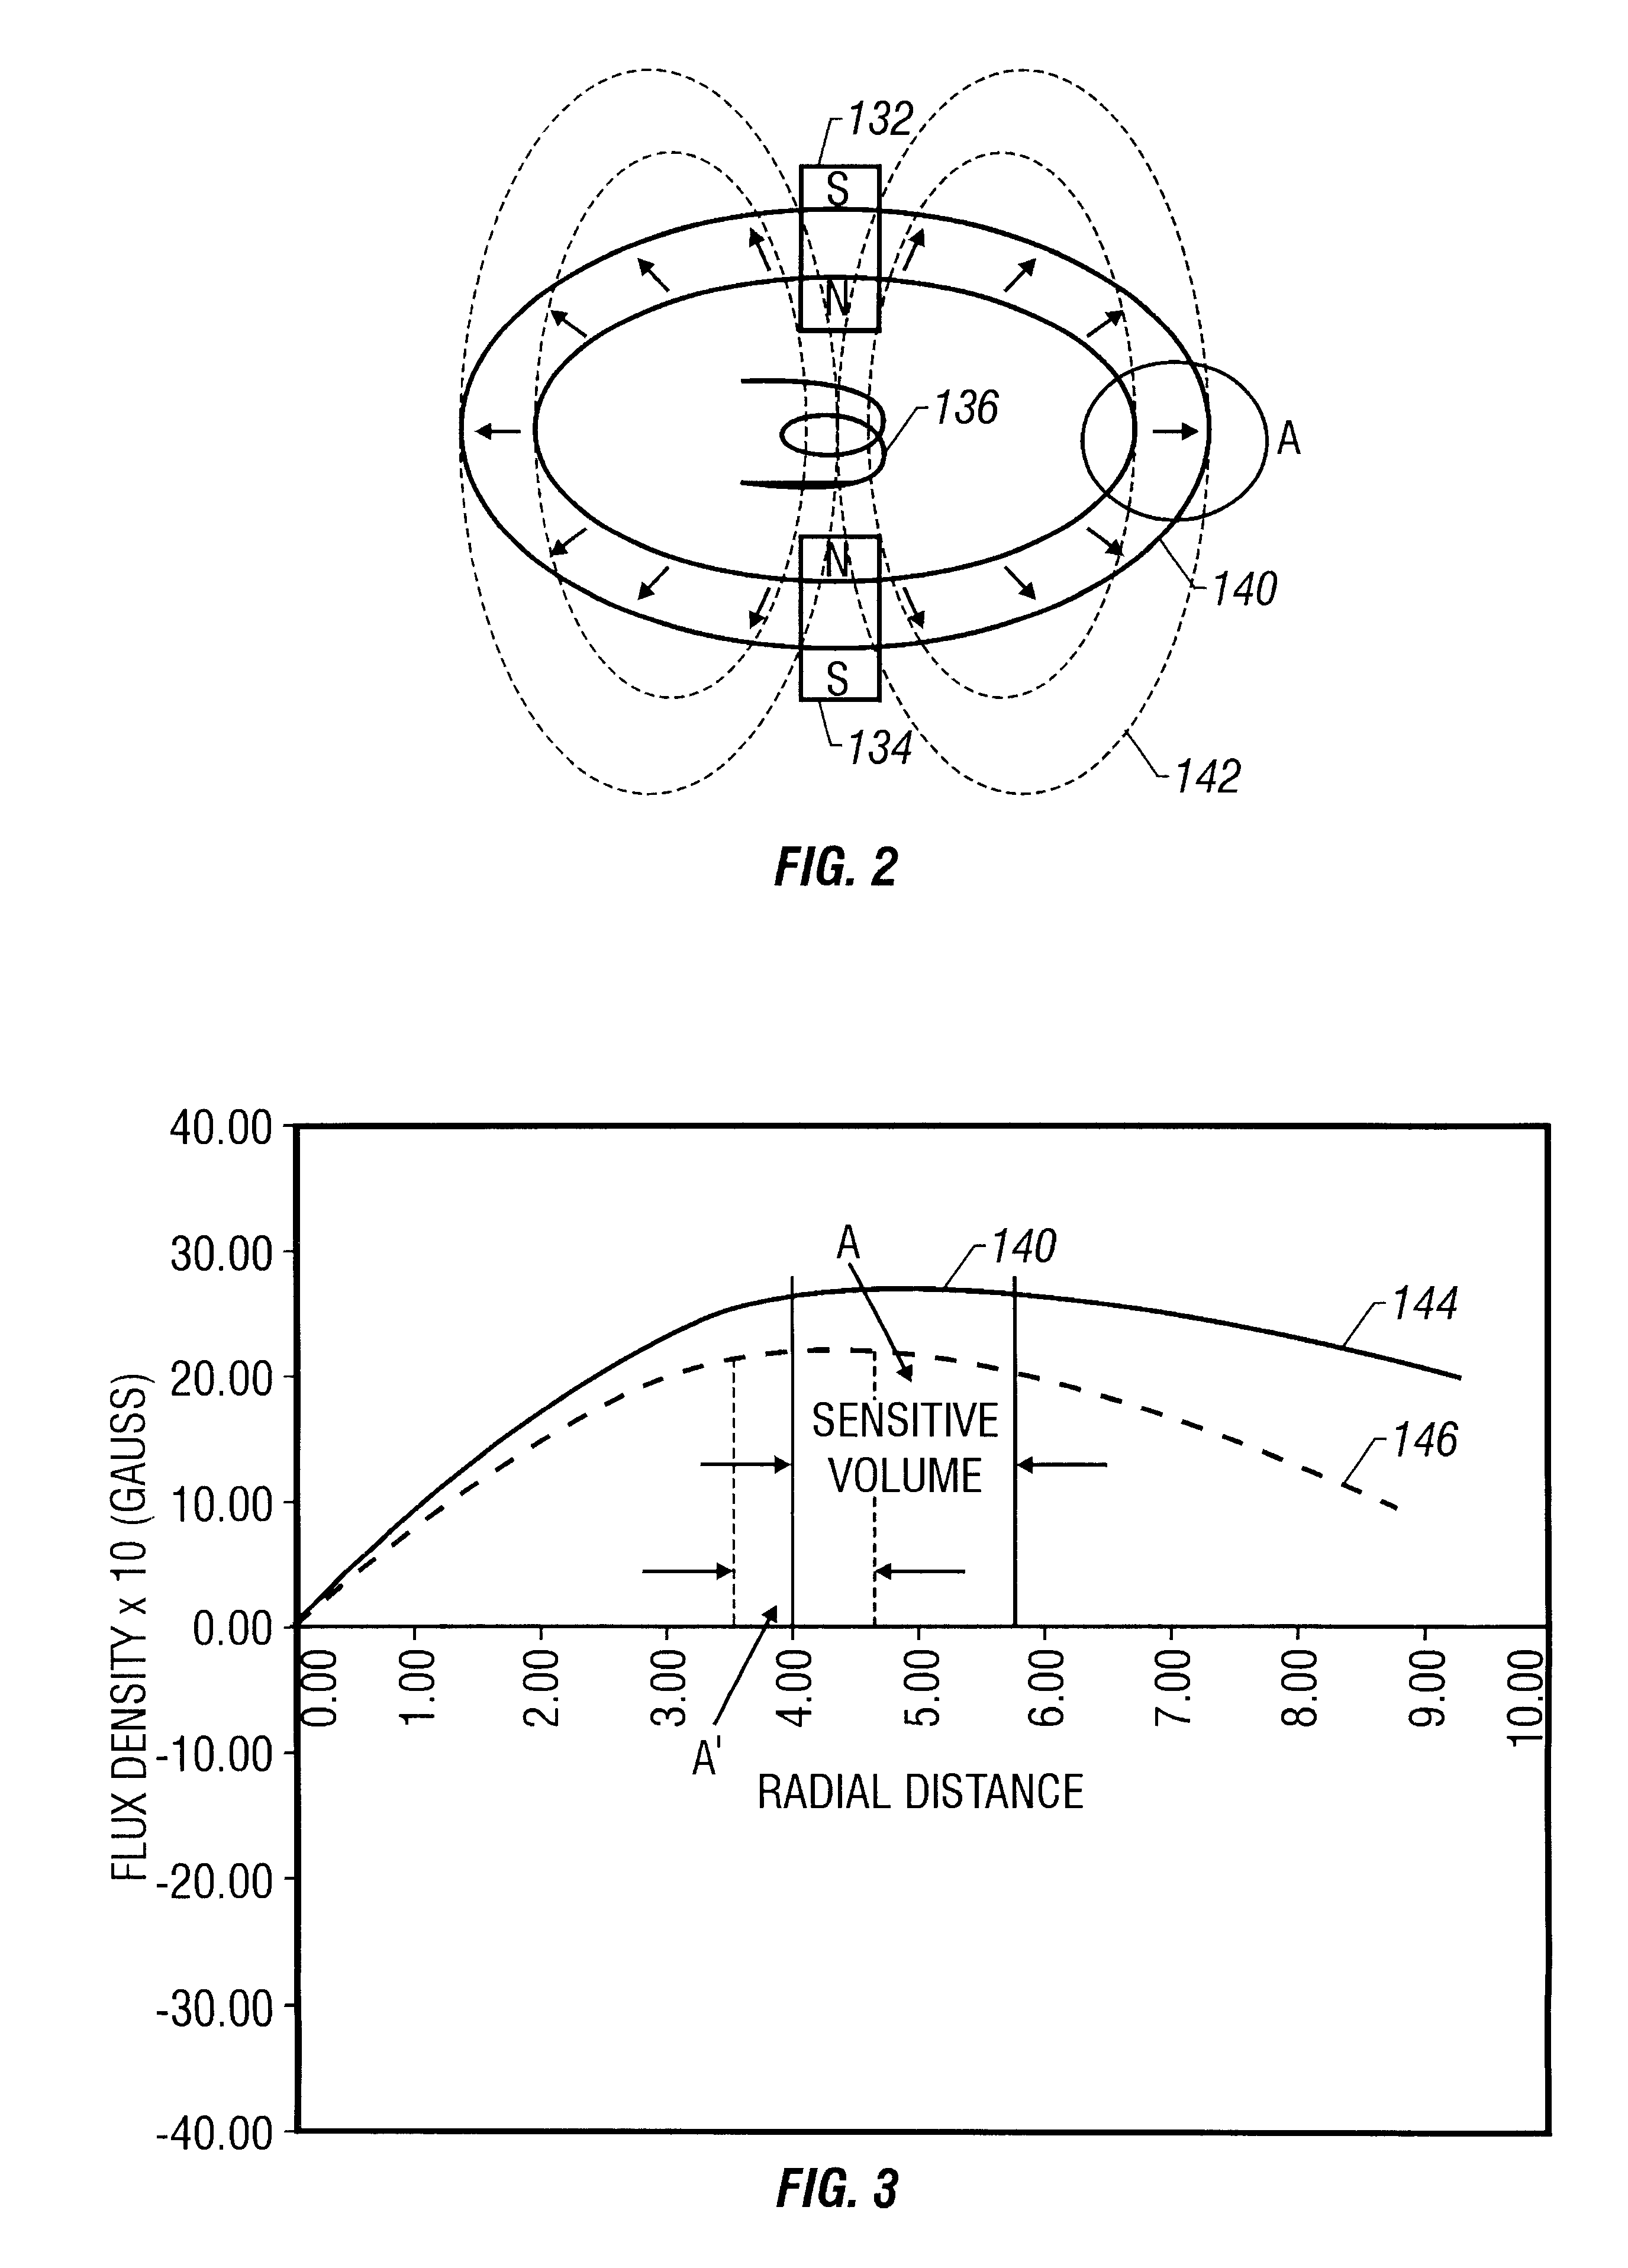 Temperature compensated nuclear magnetic resonance apparatus and method